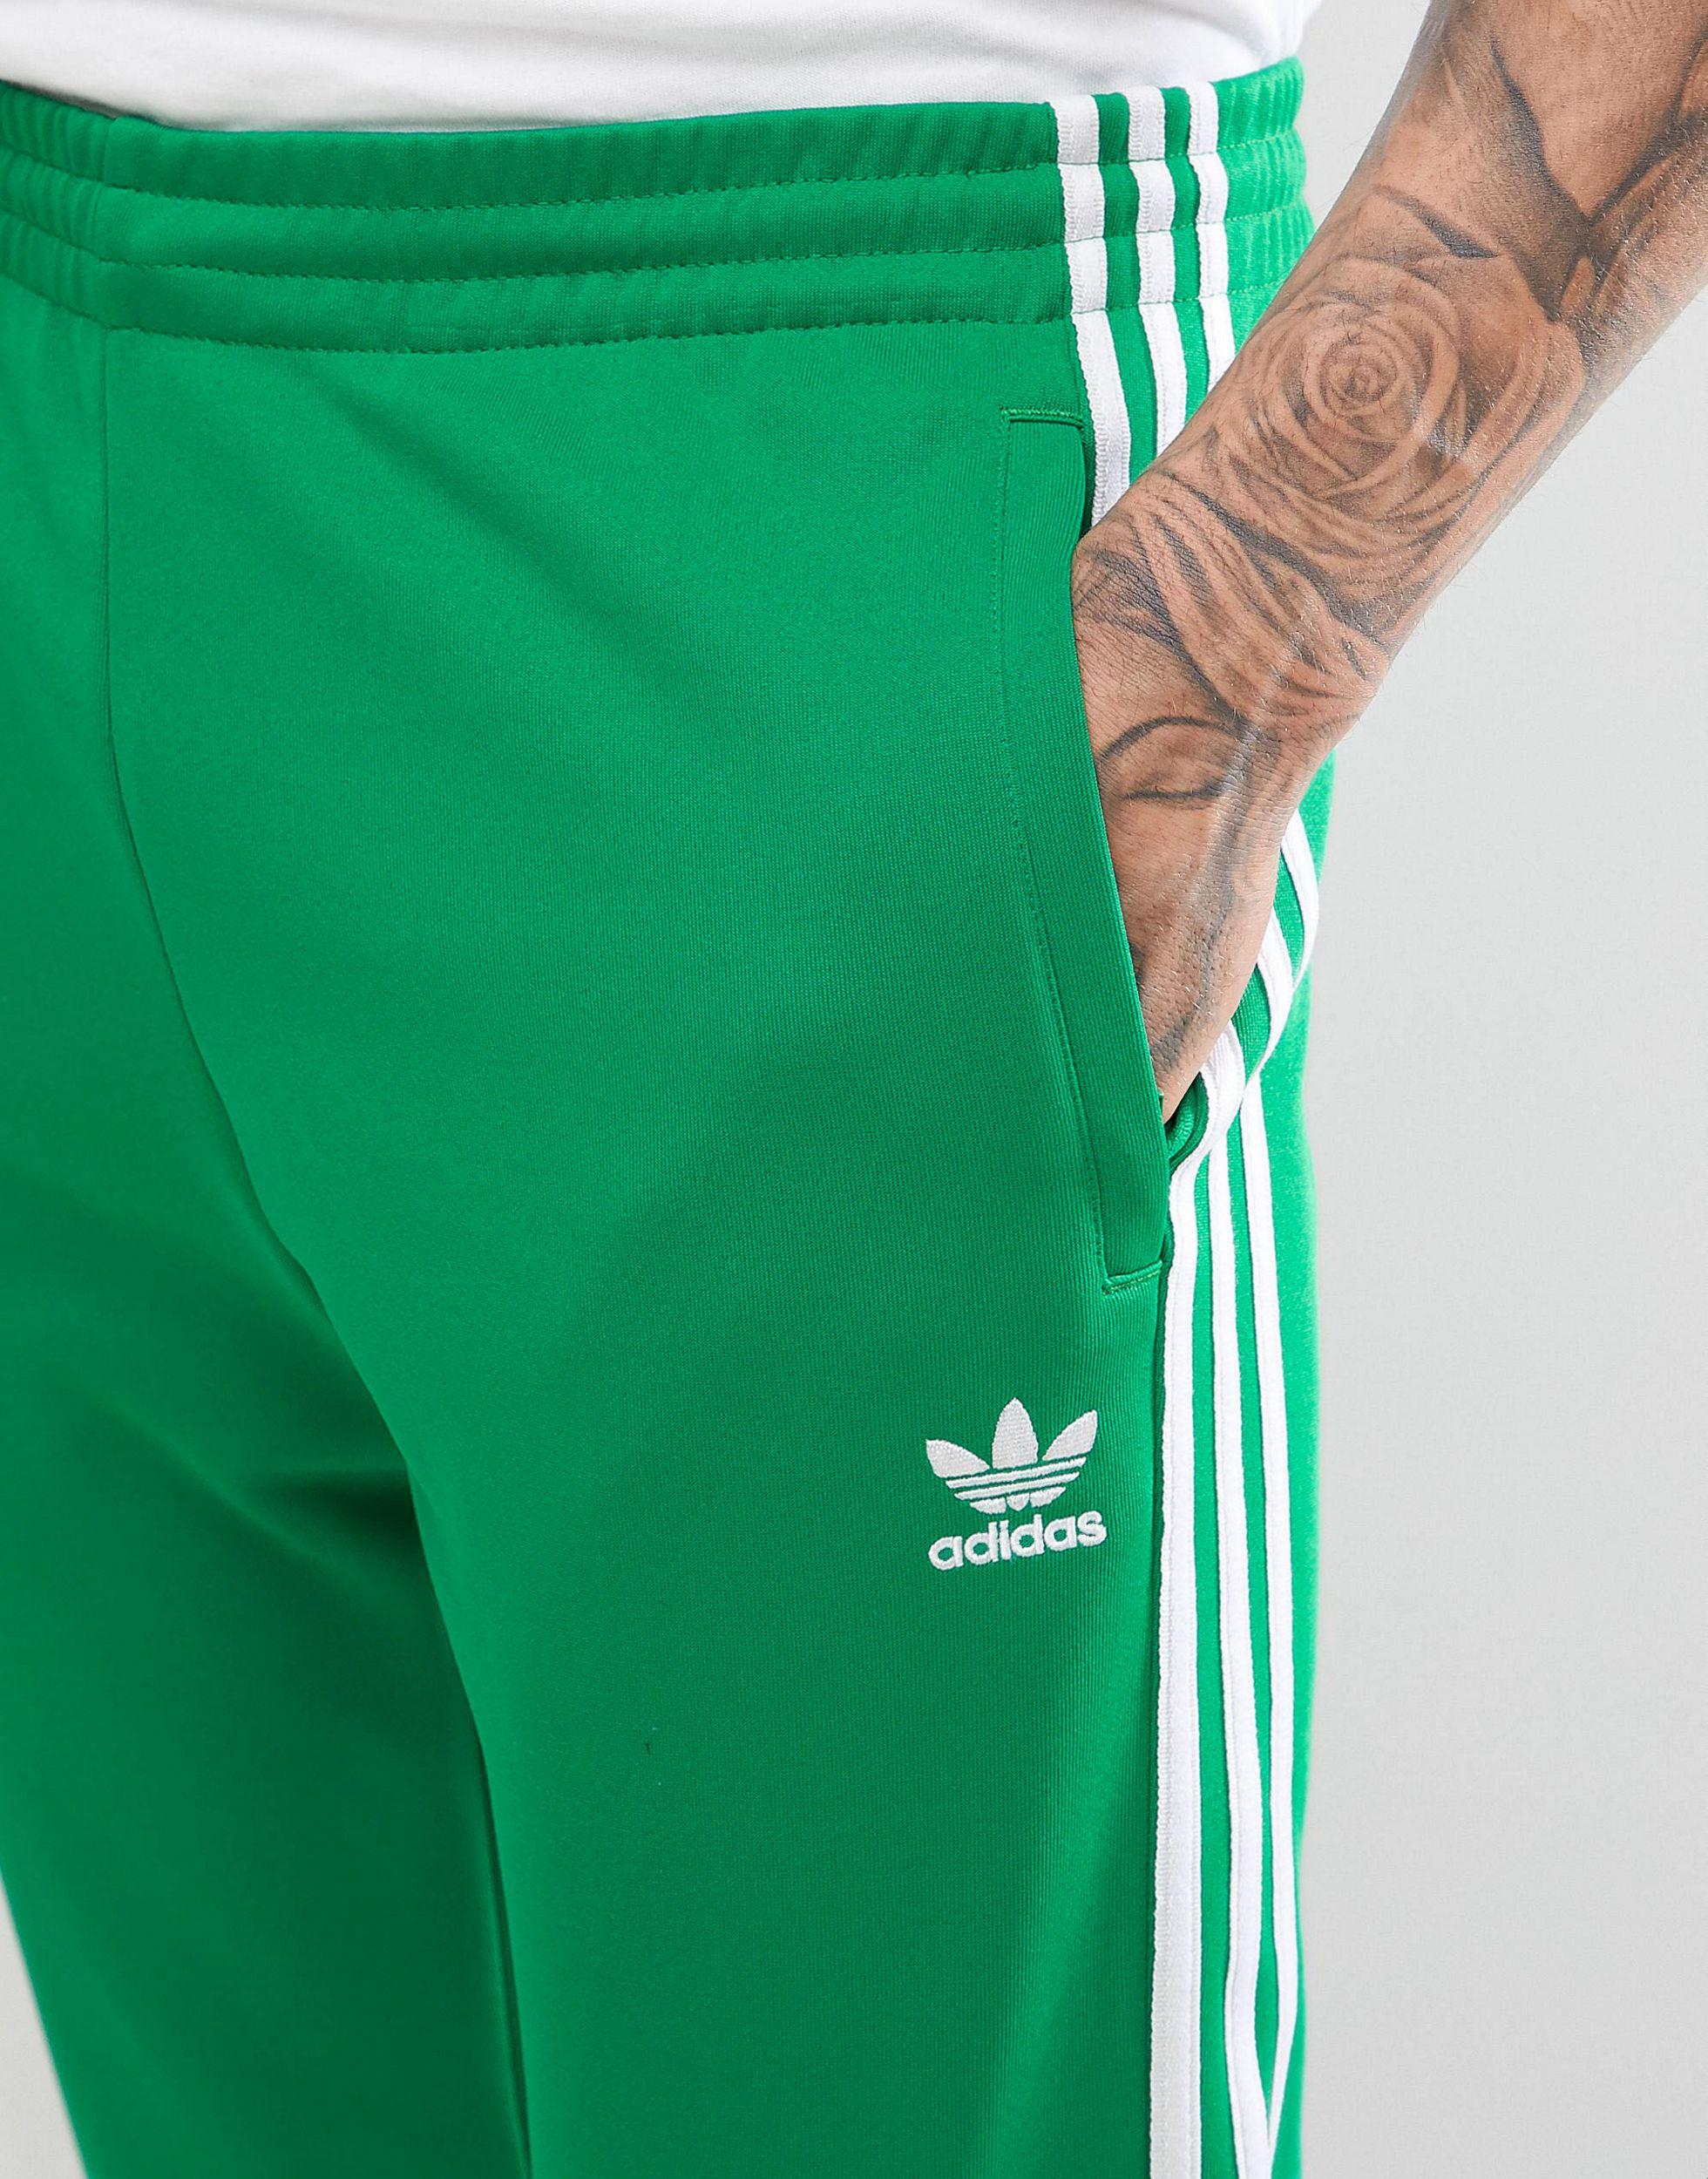 adidas Sst Track Pants in Green for Lyst